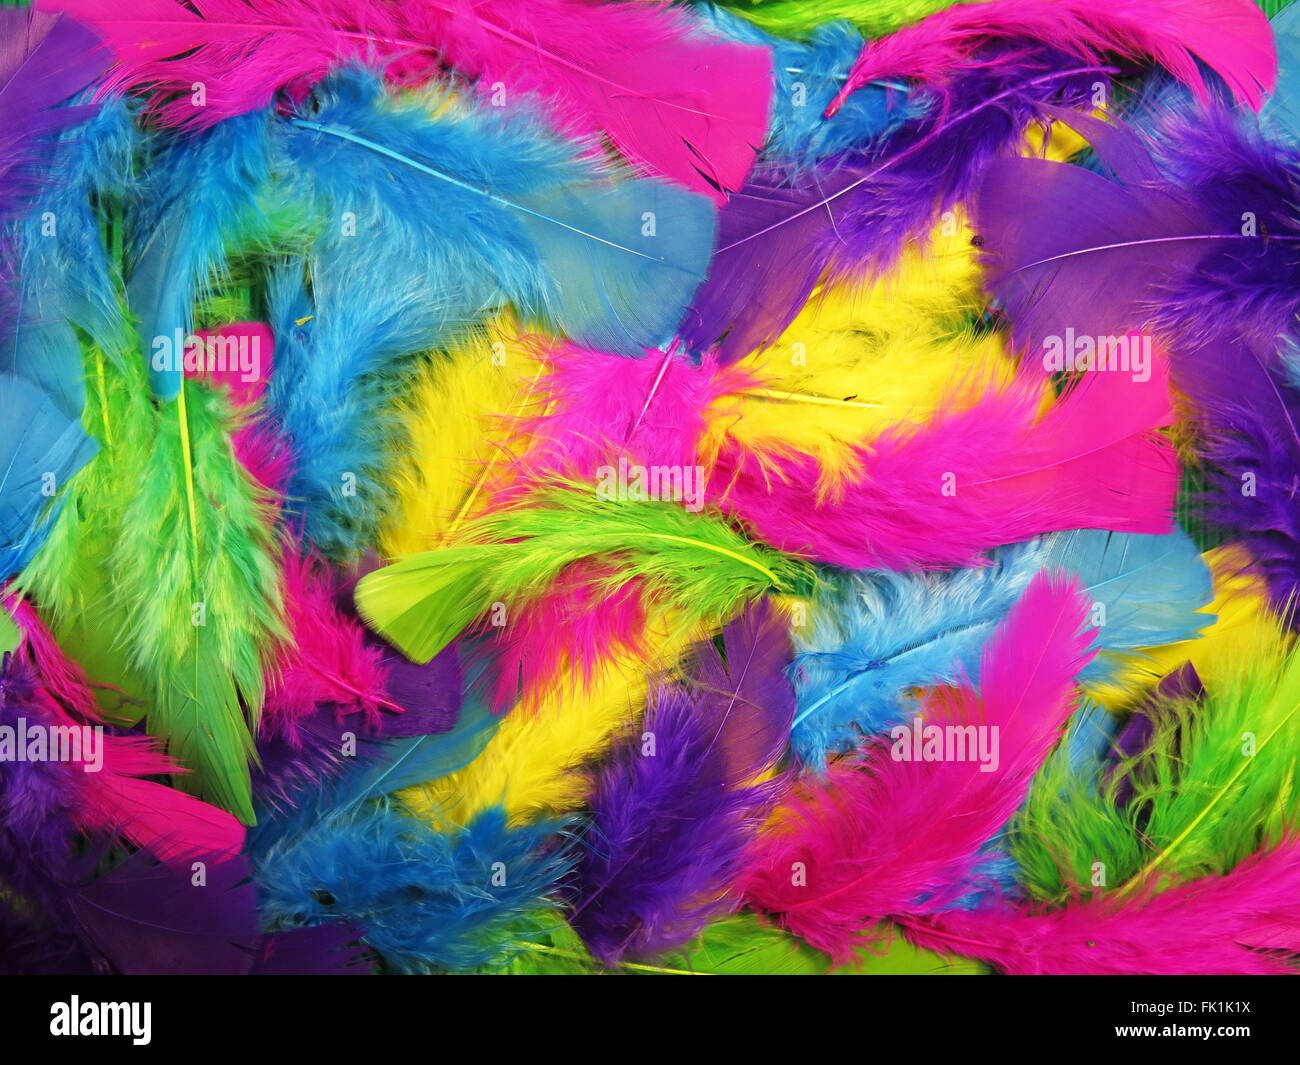 Feathers Texture Stock Photos & Feathers Texture Stock Images - Alamy